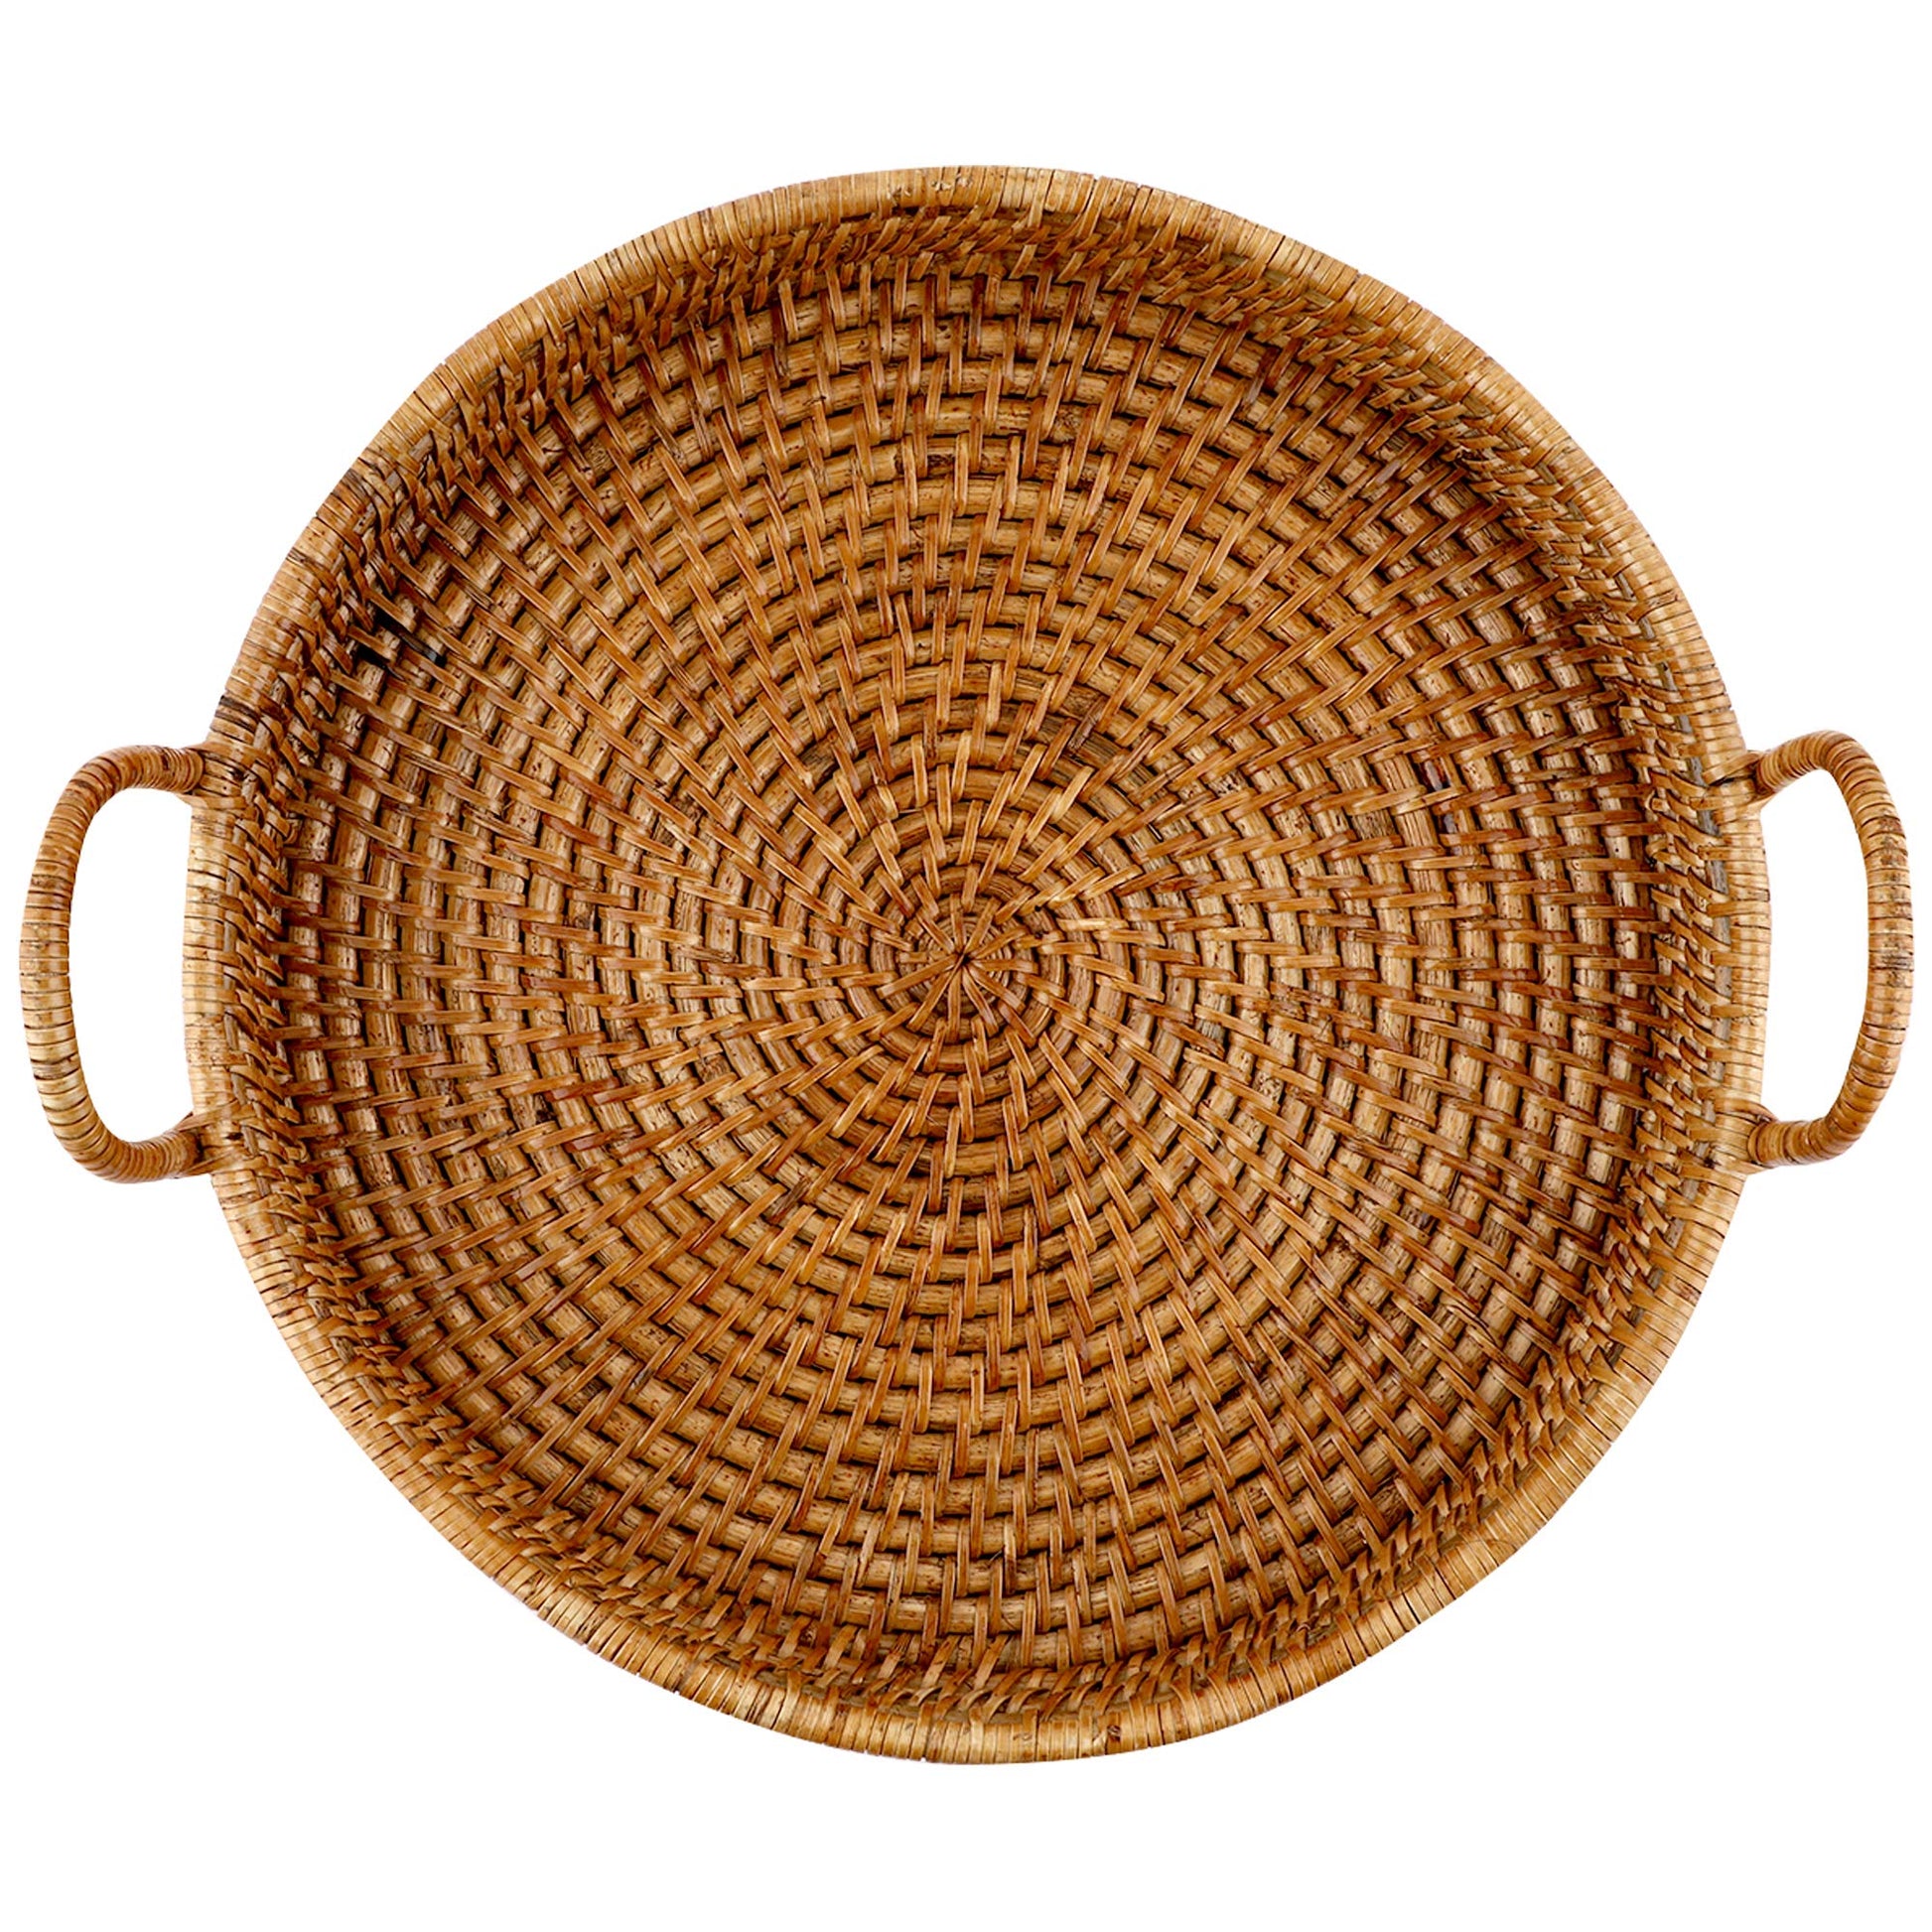 AKWAY Wicker Serving Tray Wooden Serving Tray for Home | Dining Table Decorative Trays | Serving Tray for Party Guests | Round Platter with Handles Diwali or Deepawali Gifts (Beige) - Akway